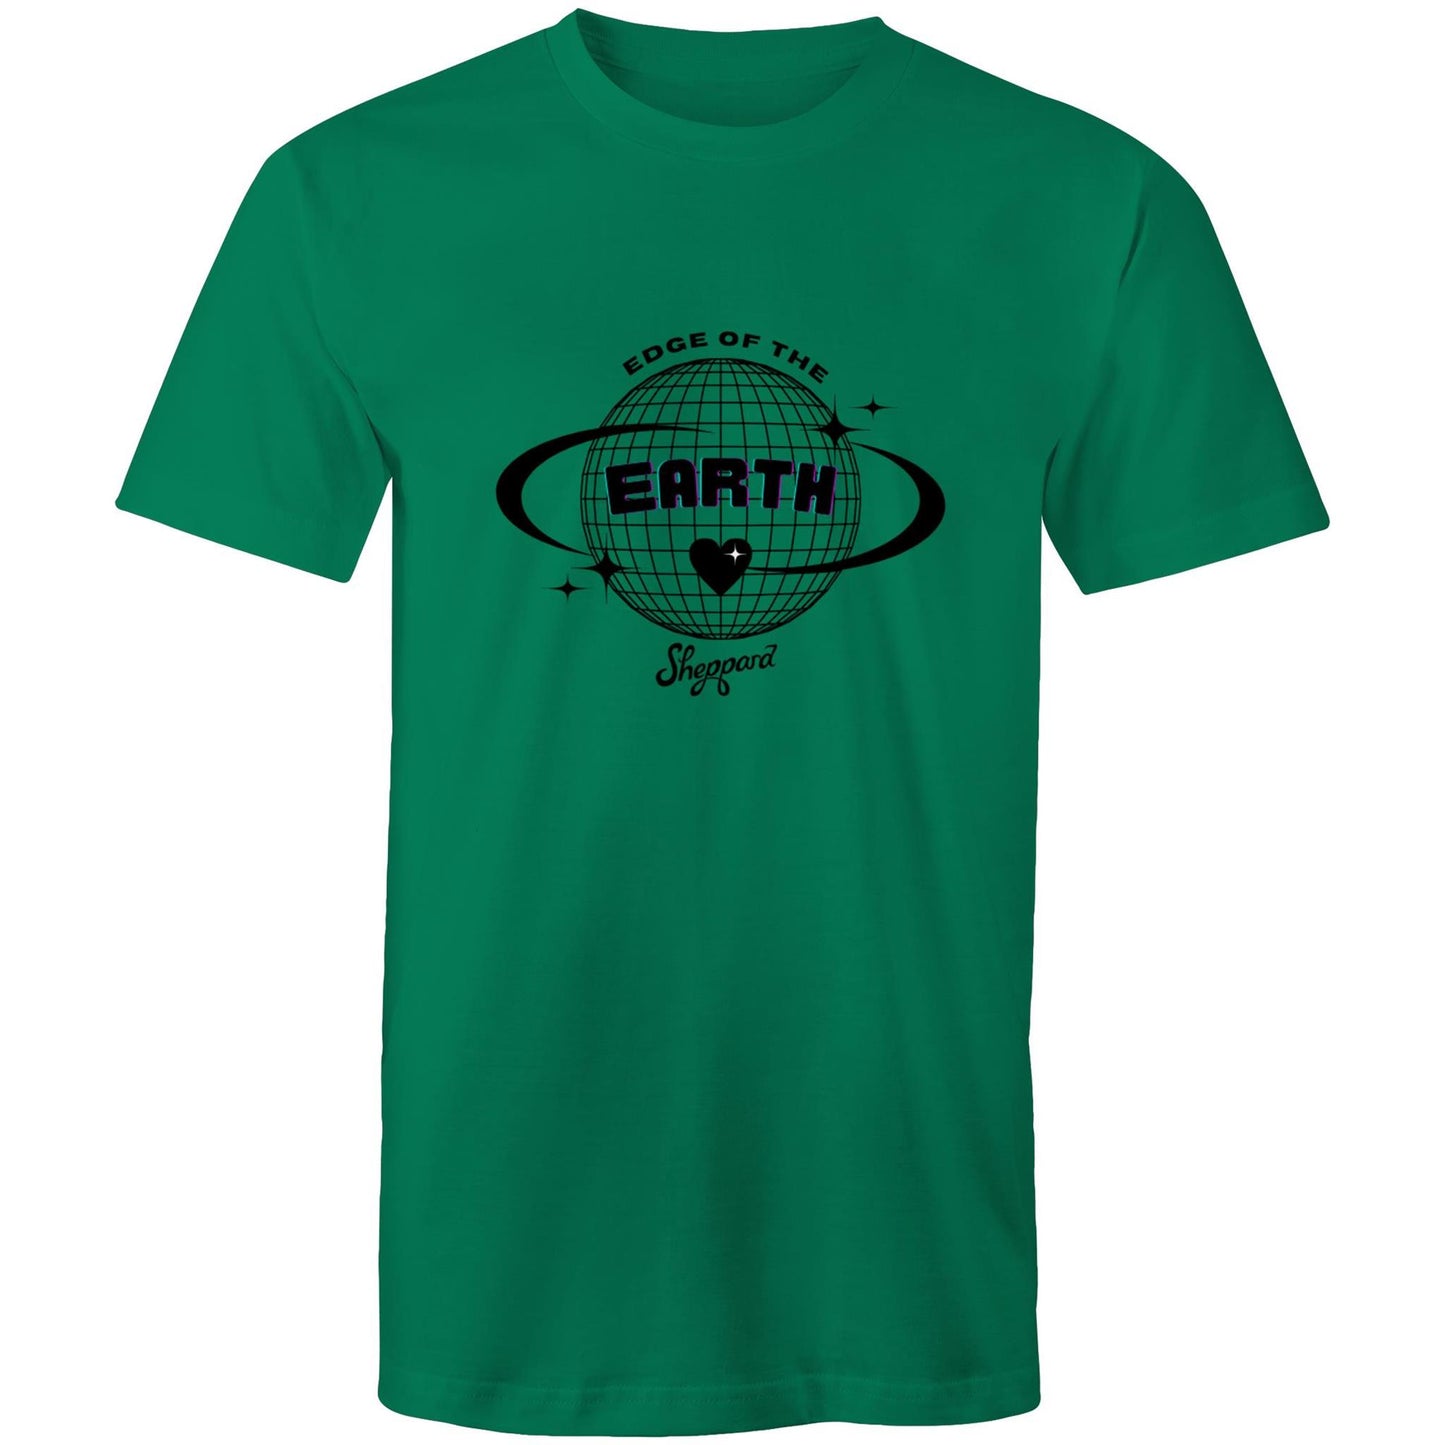 Edge of the Earth T-Shirt